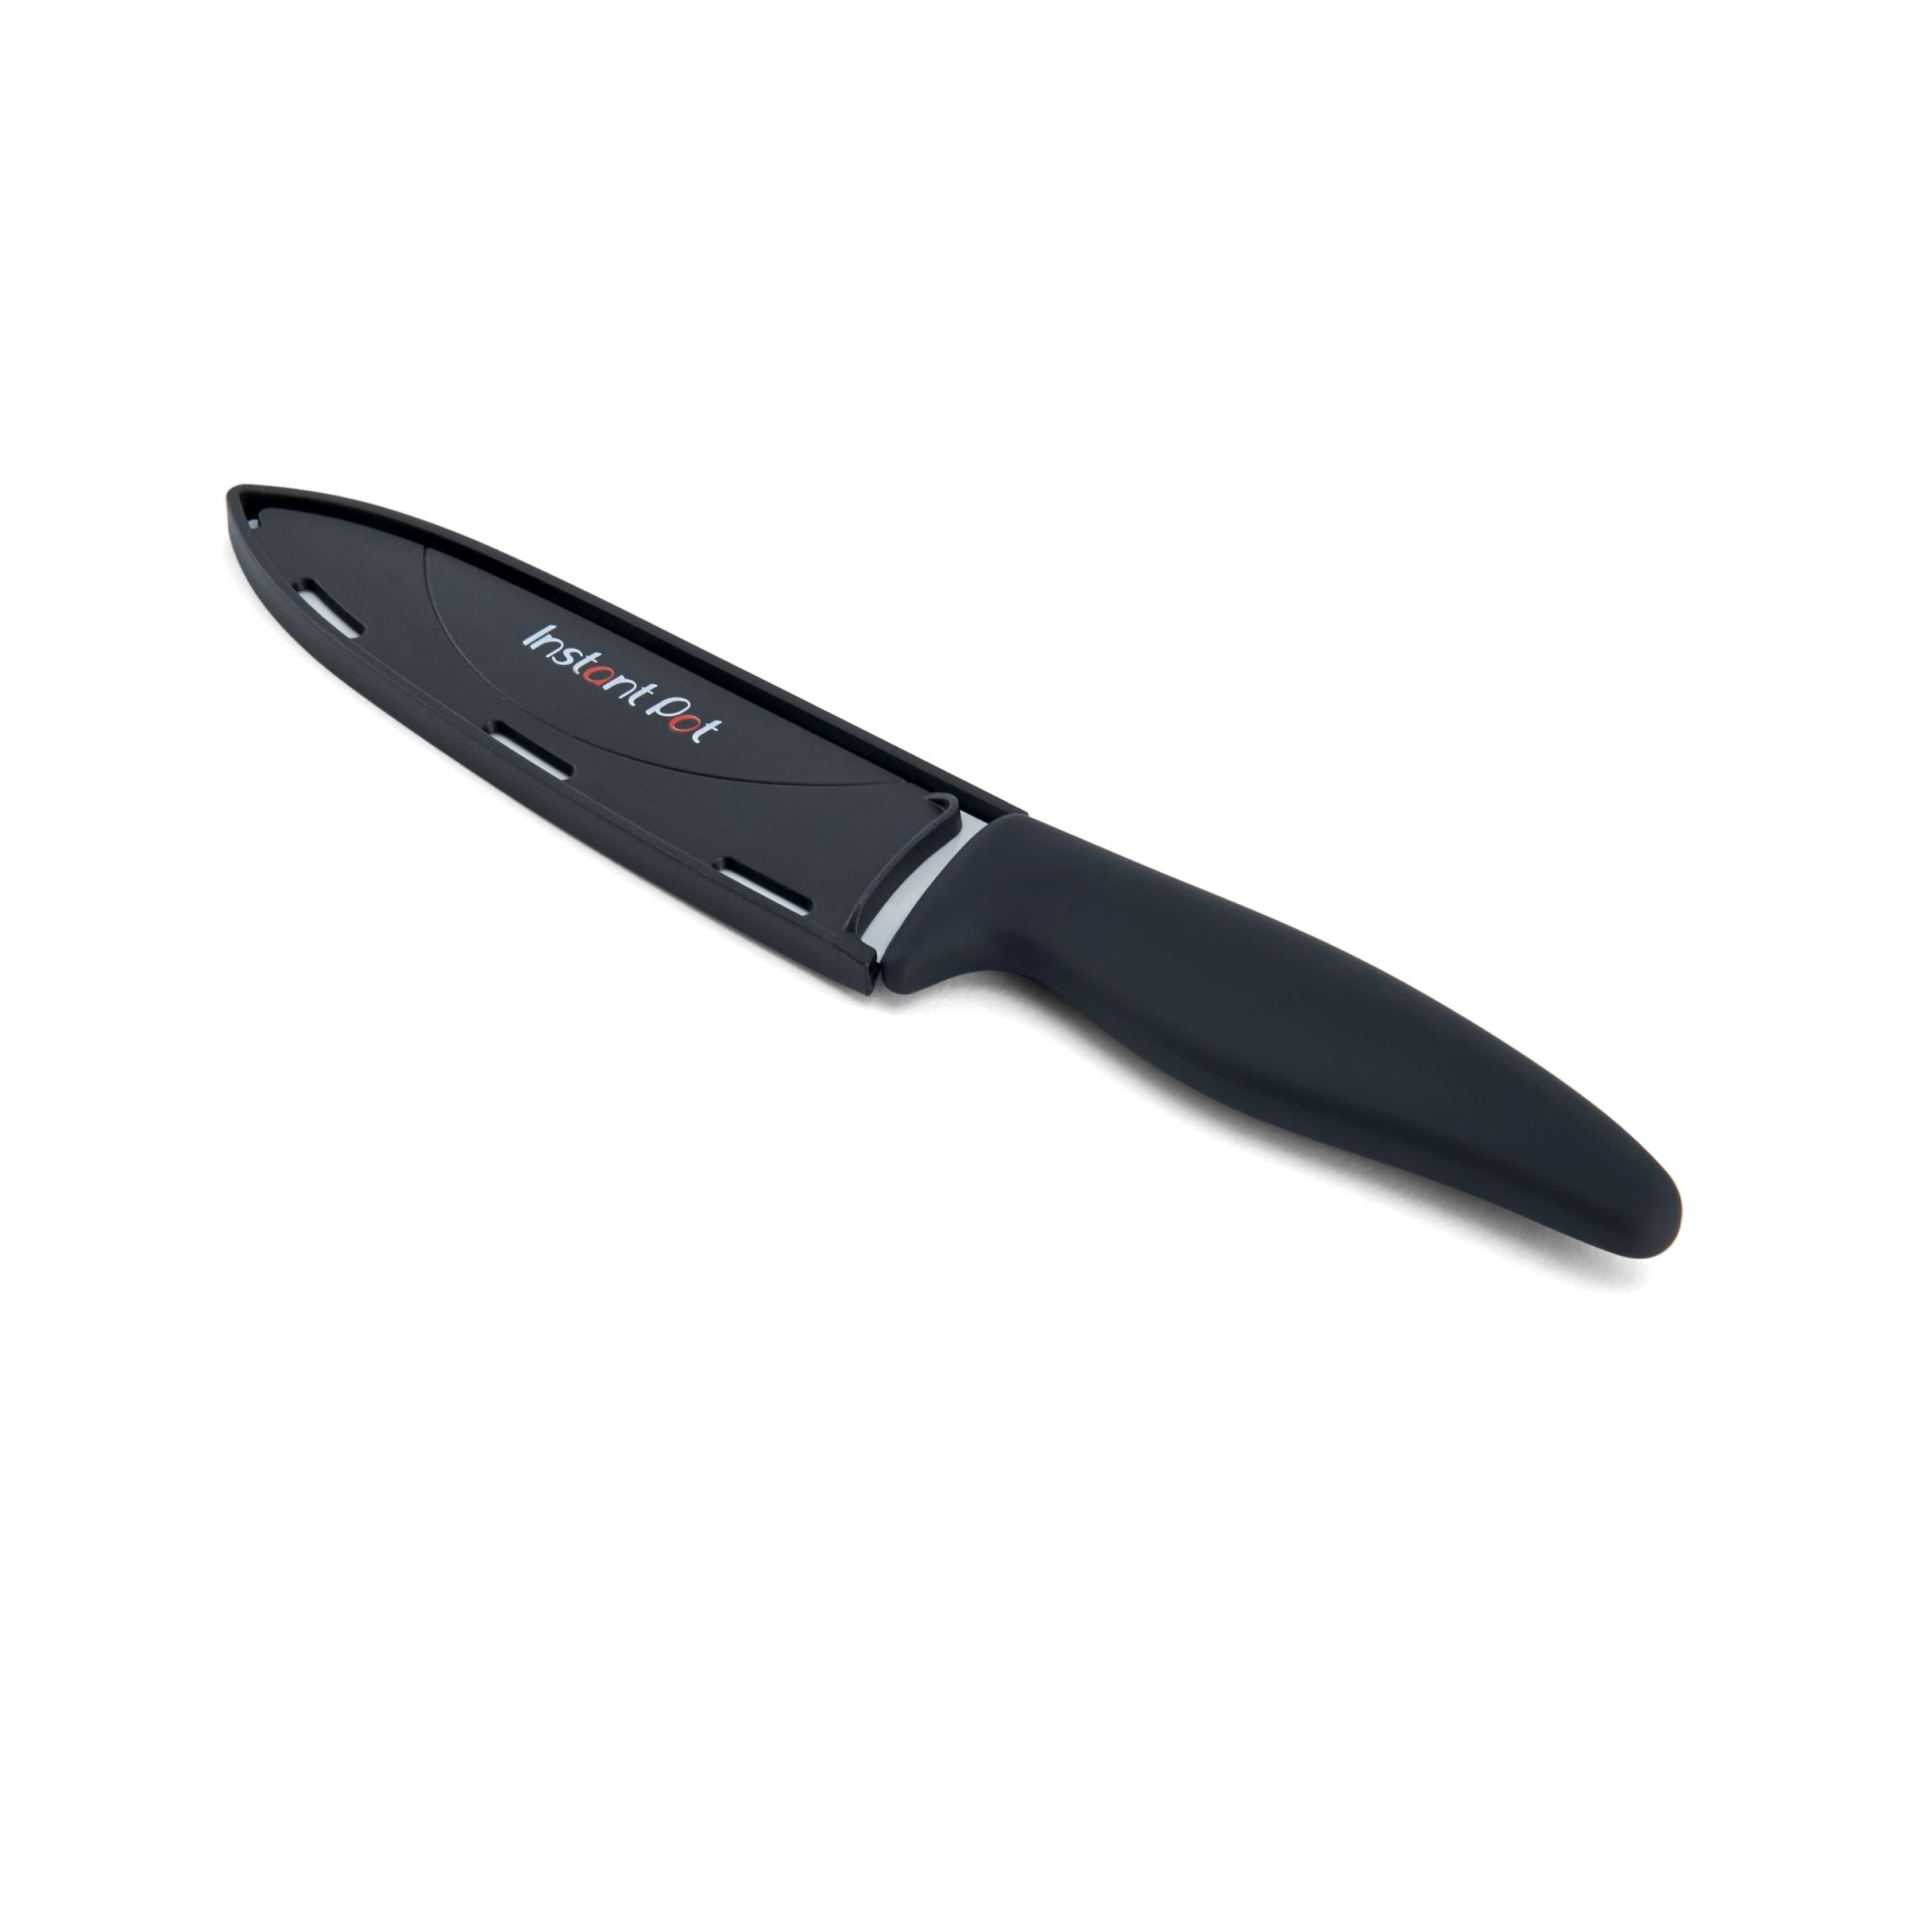 Advanced Ceramic Paring Knife - 4 inch Blade Never Needs Sharpening - Premium Kitchen Knife with Sheath and Magnetic Gift Box - Black Mirror Finish